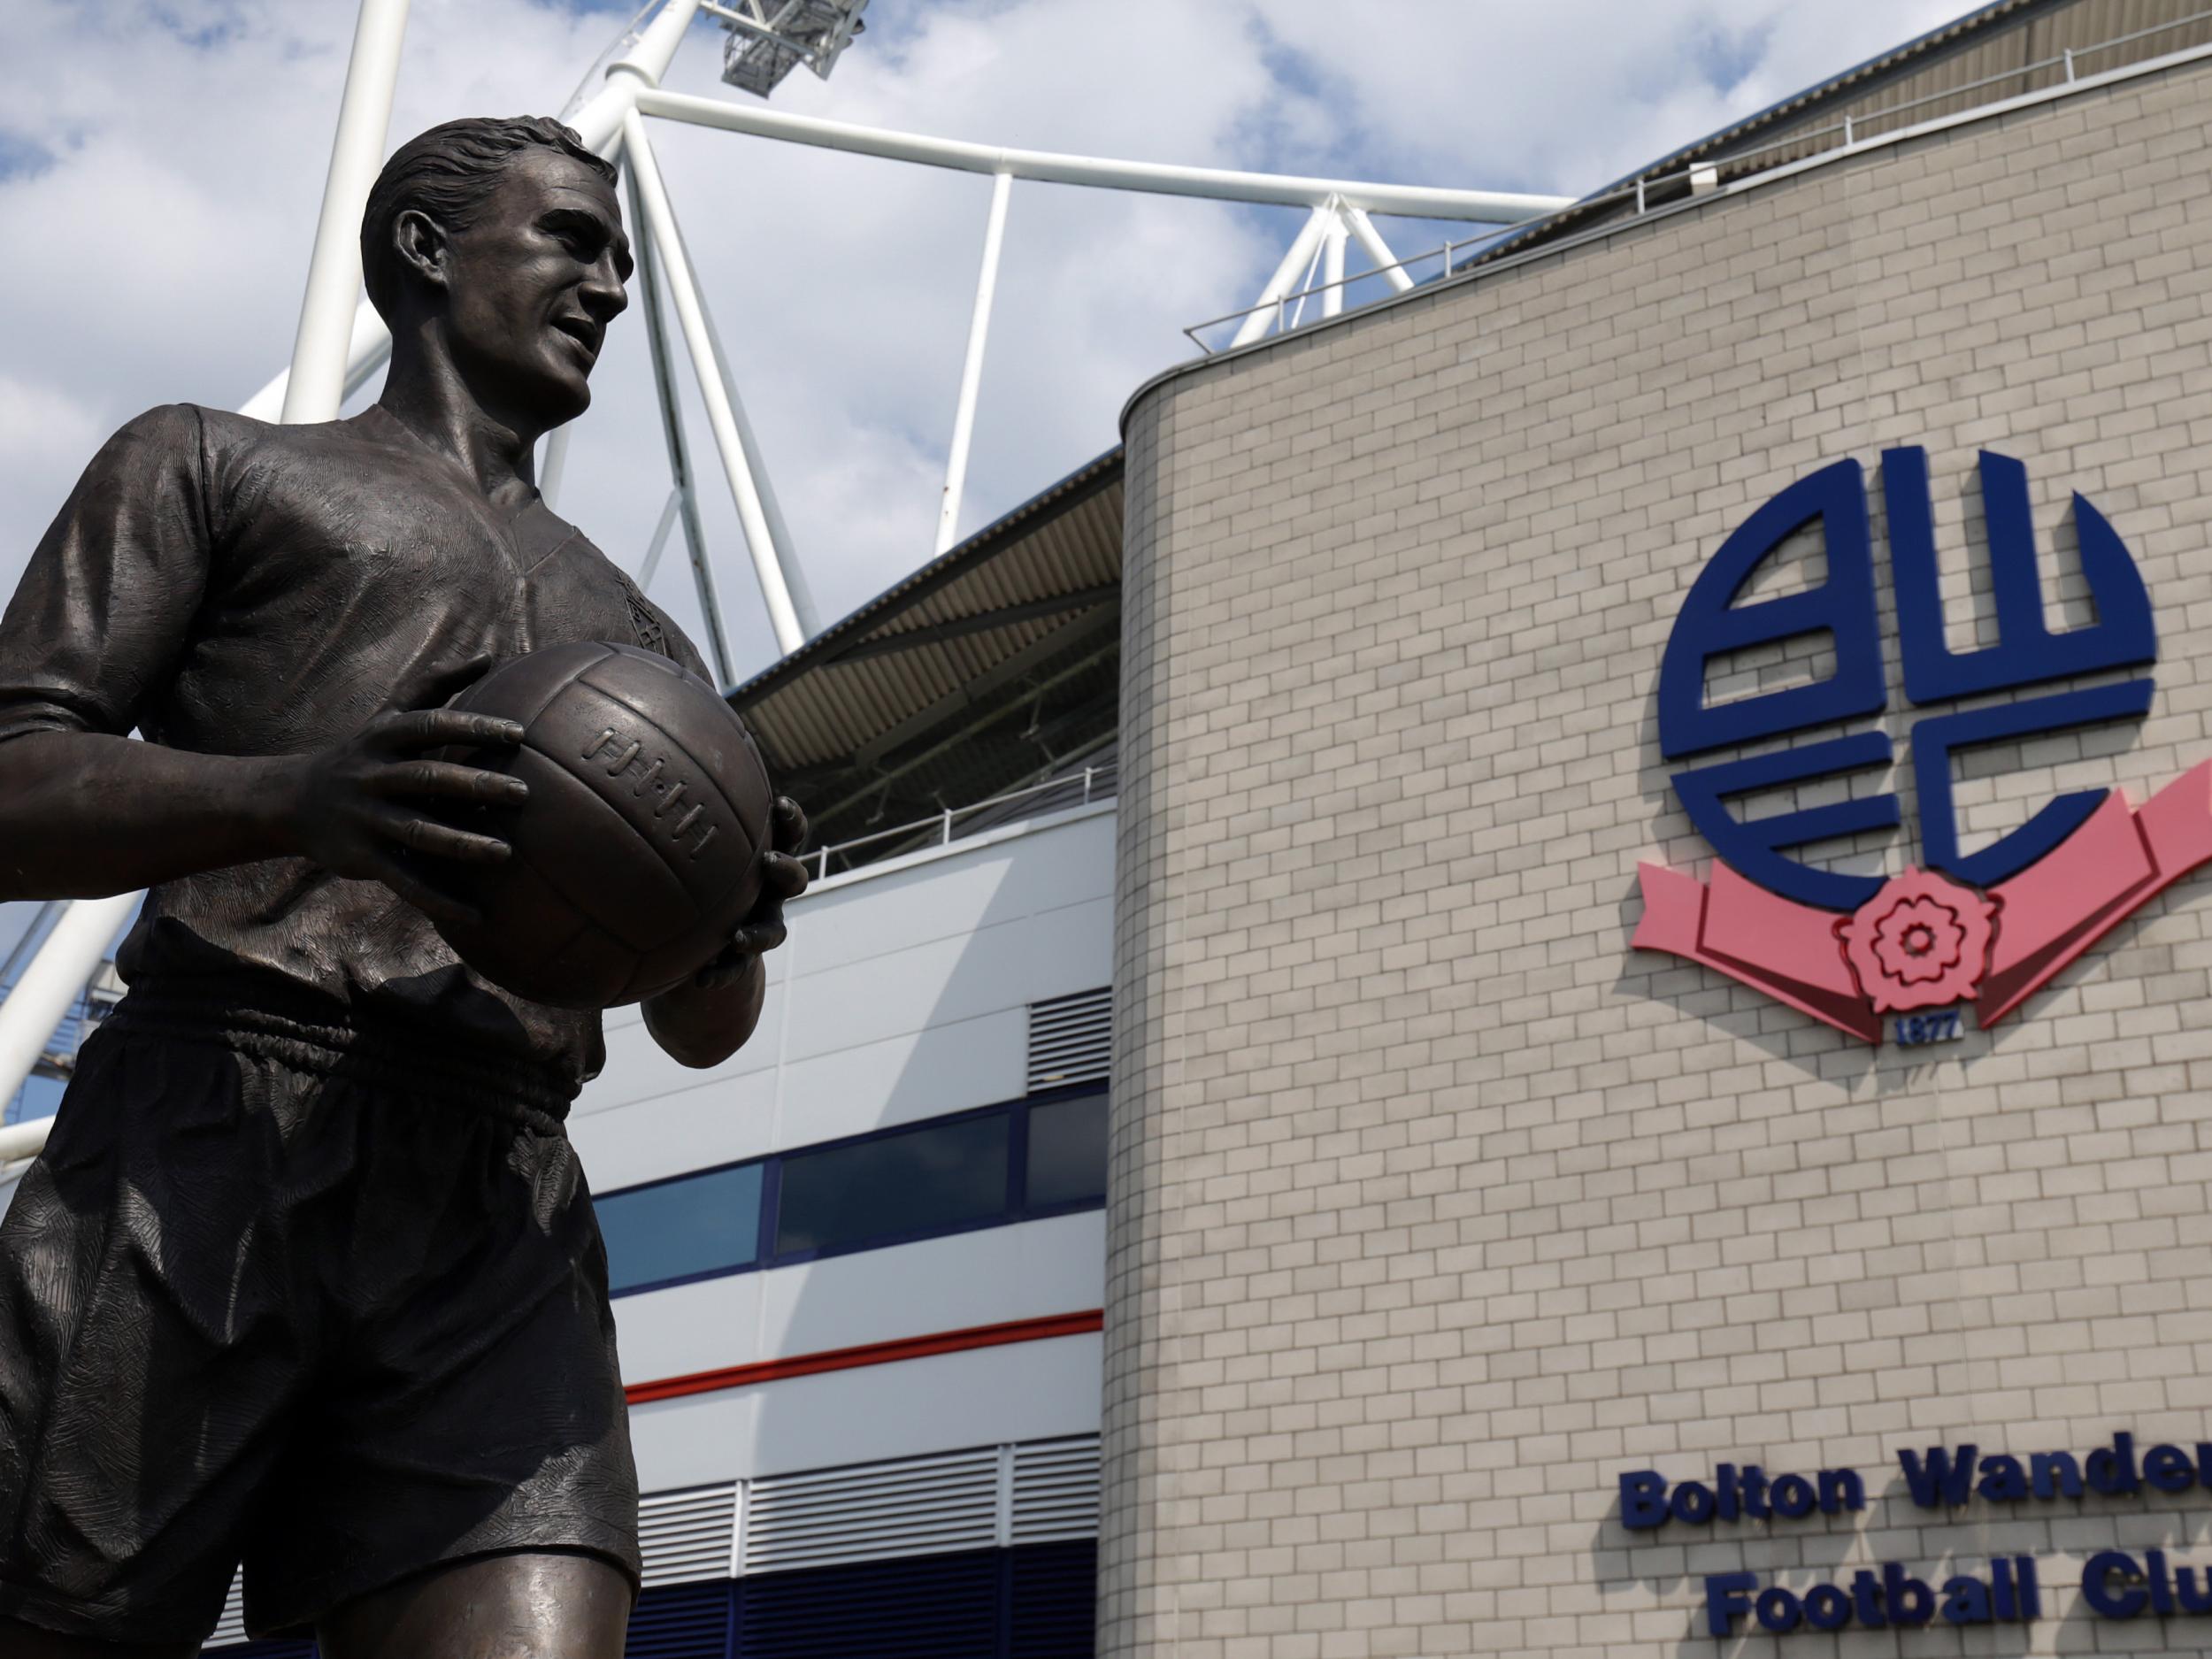 The ghost of the Premier League is present wherever you look at the home of Bolton